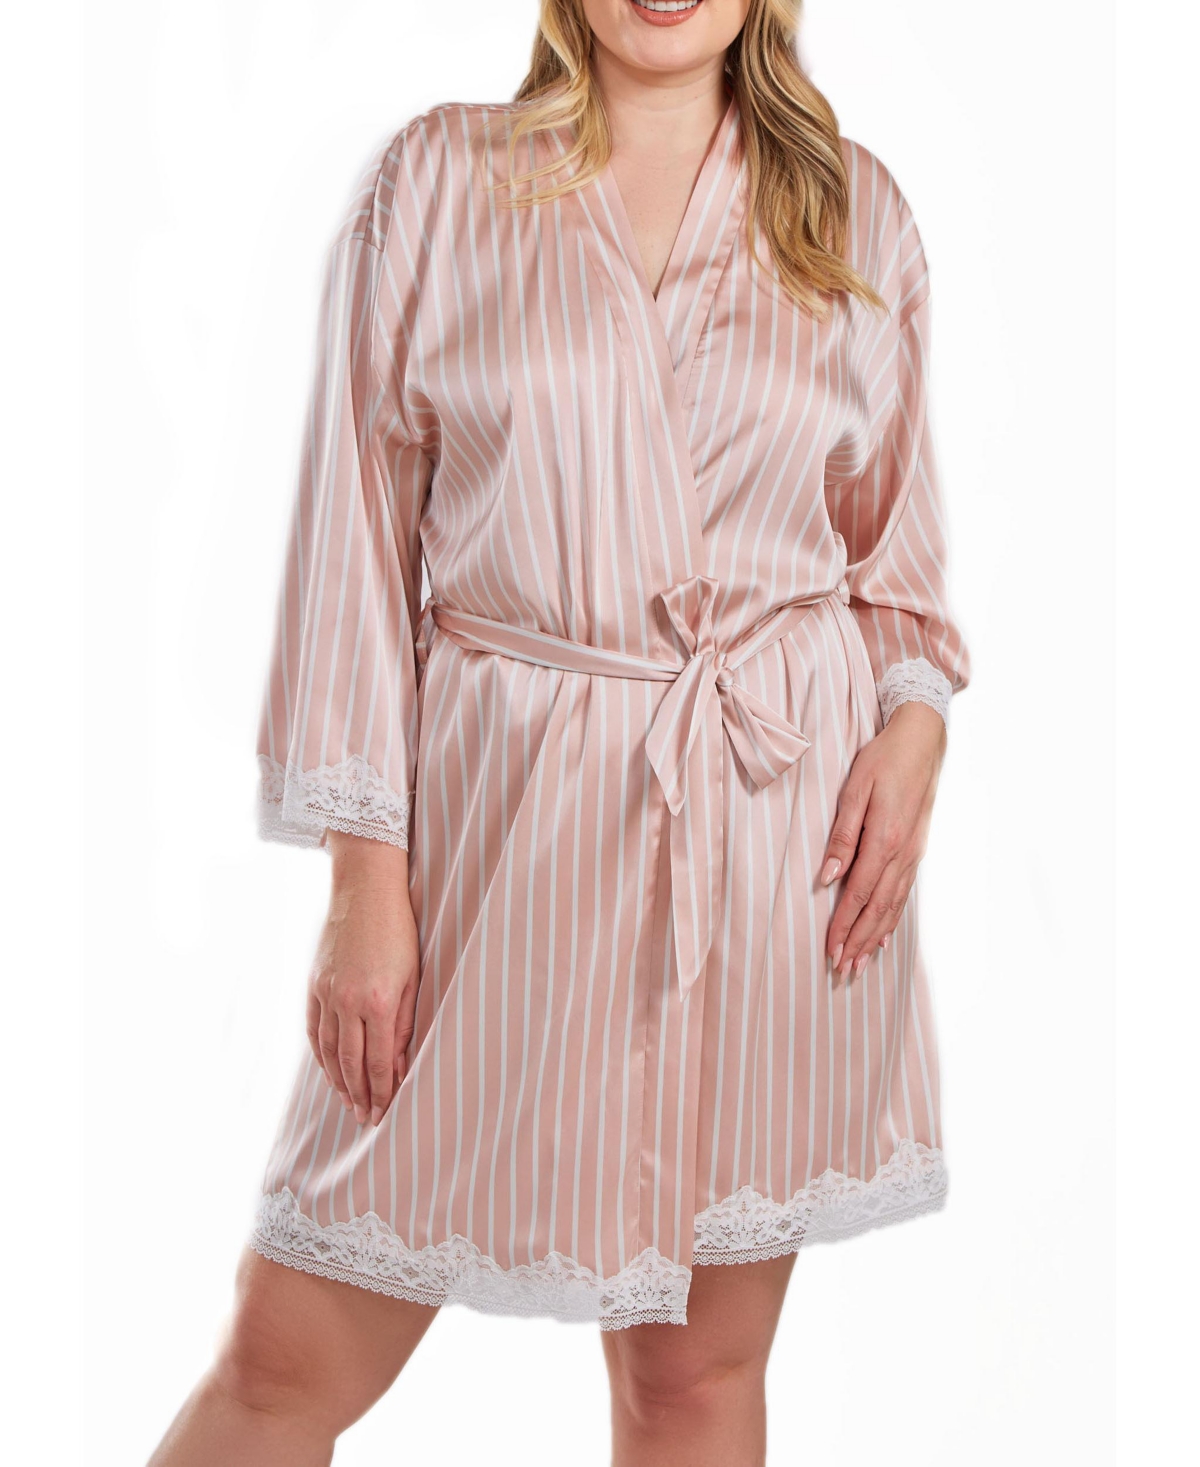 Icollection Brillow Plus Size Satin Striped Robe With Self Tie Sash And Trimmed In Lace In Pink